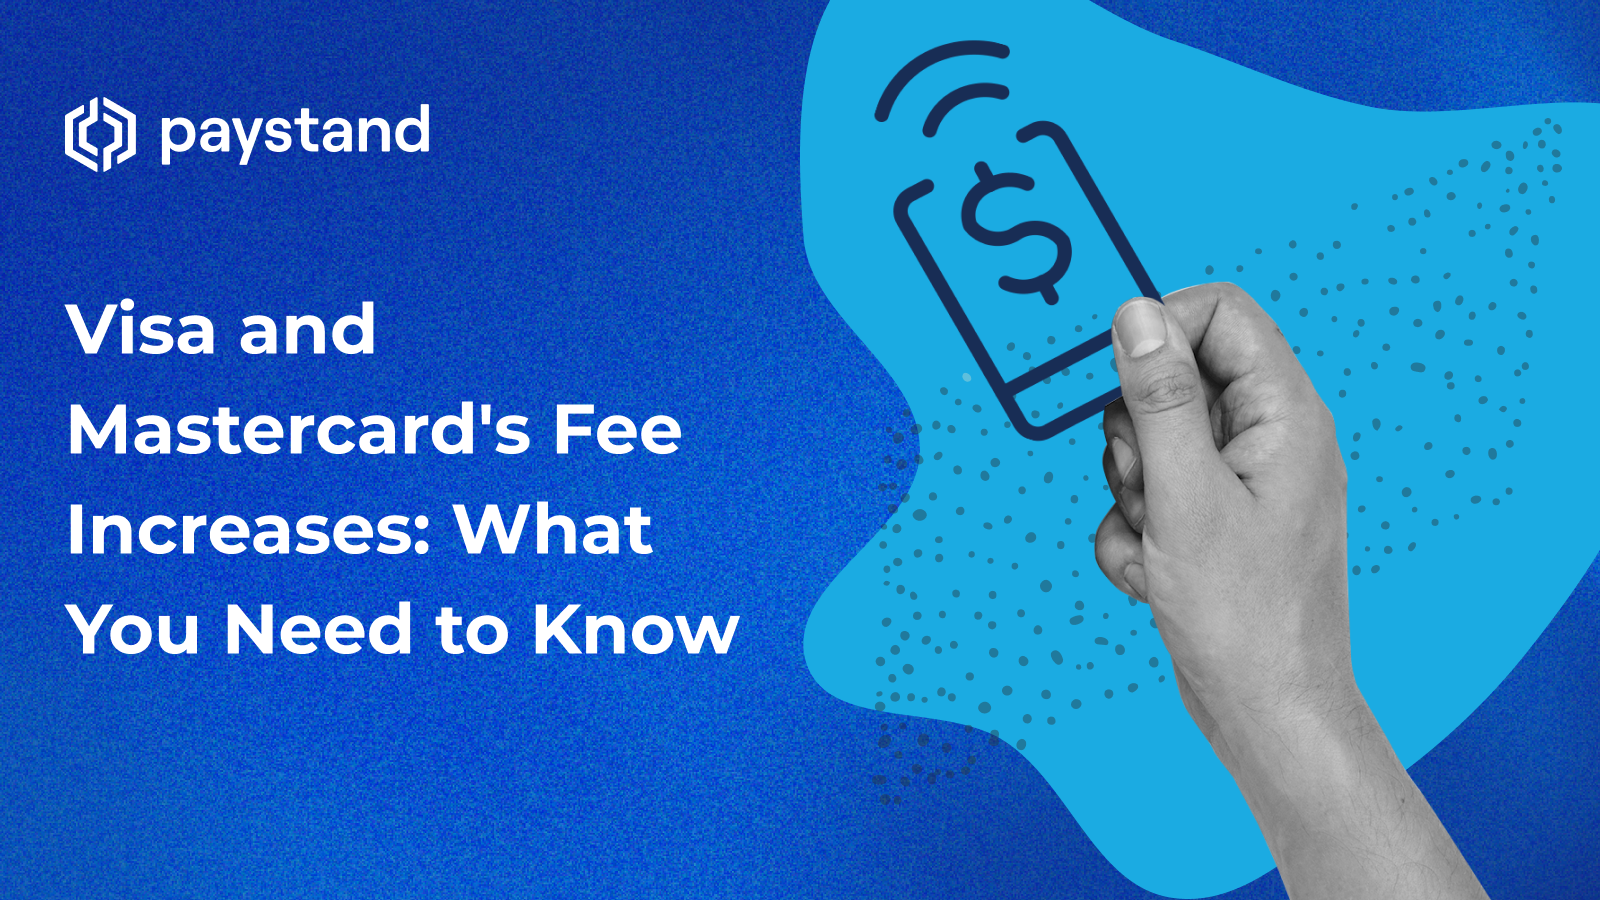 Visa and Mastercard's Fee Increases: What You Need to Know